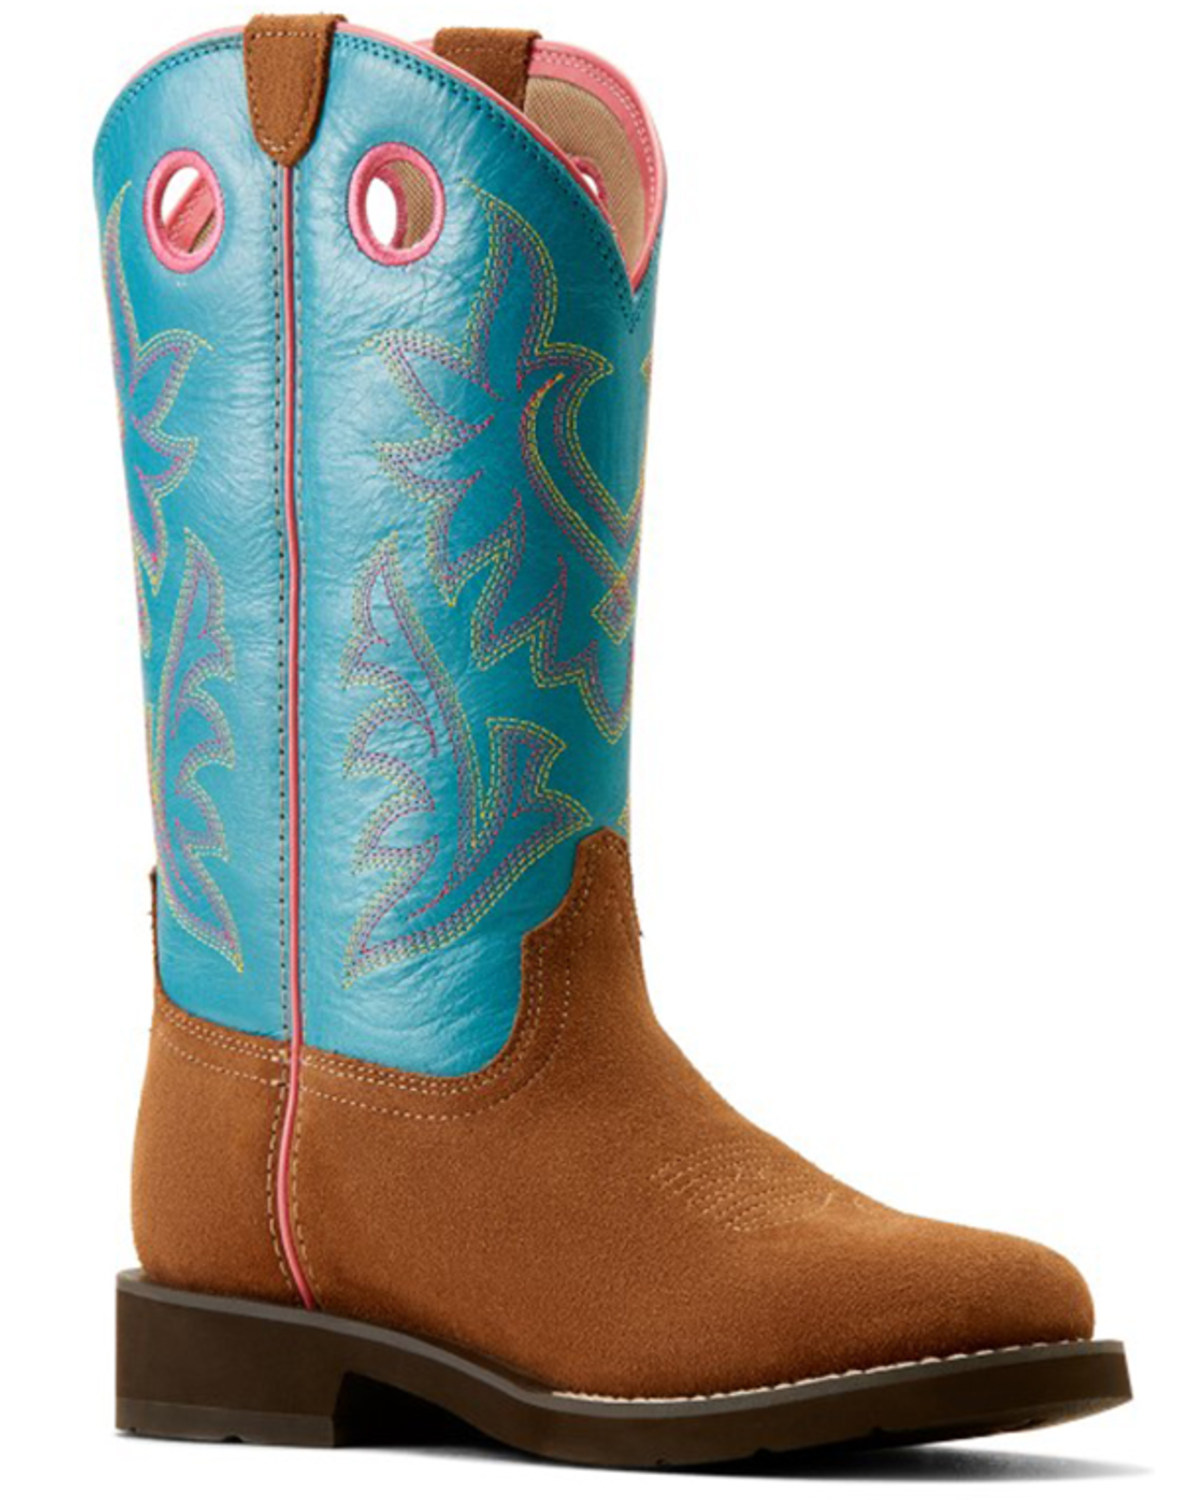 Ariat Women's Elko Roughout Performance Western Boots - Round Toe